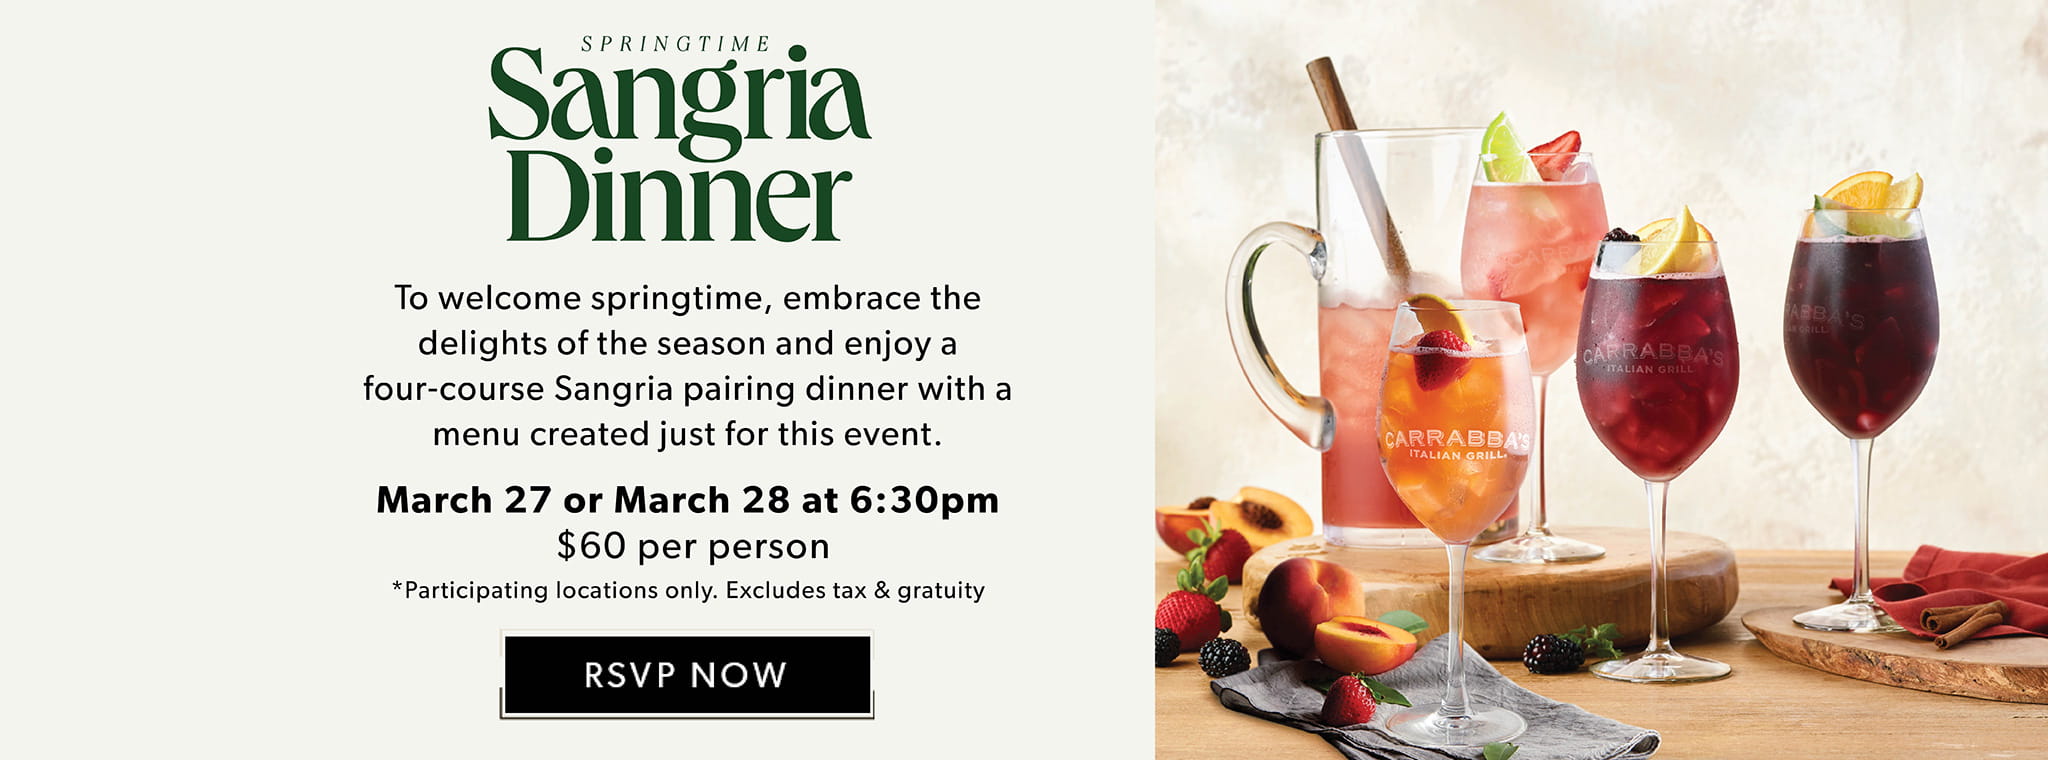 Carrabba's Springtime Sangria Dinner March 27 and March 28